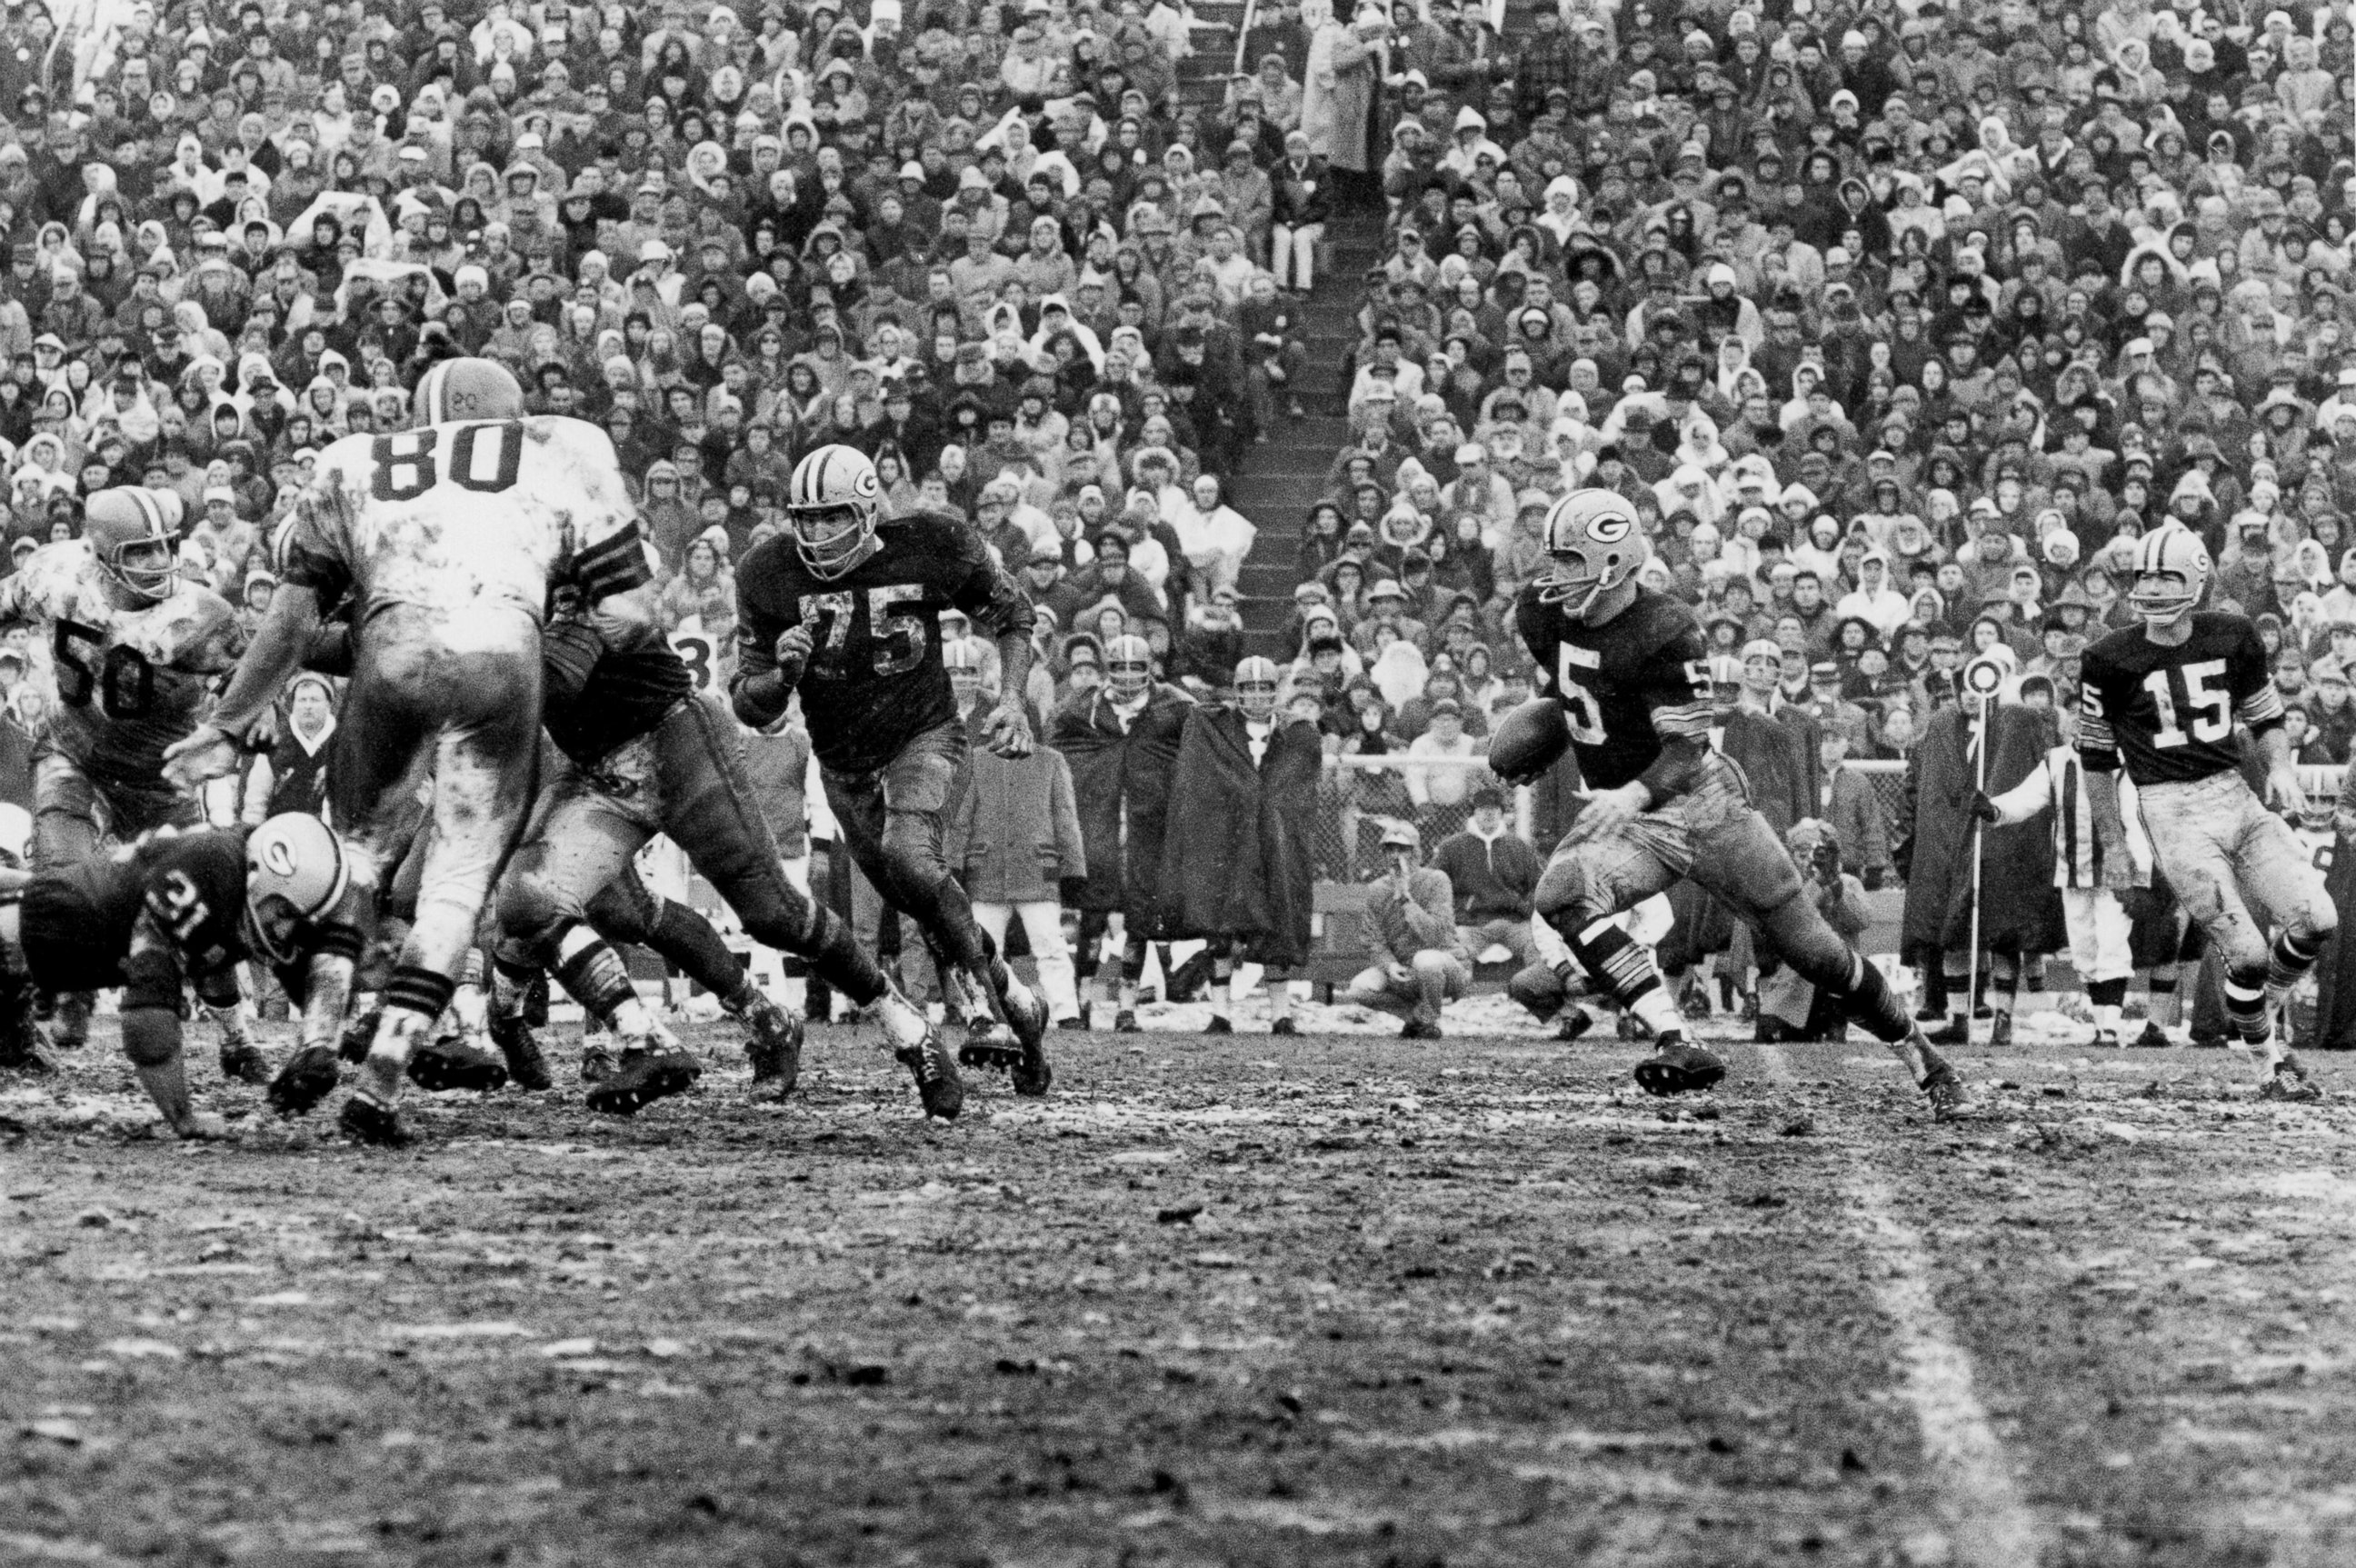 PHOTO: Green Bay Packers Hall of Fame halfback Paul Hornung on a carry in a 23-12 win over the Cleveland Browns in the 1965 NFL Championship Game on Jan. 2, 1966 at Lambeau Field in Green Bay, Wisconsin.